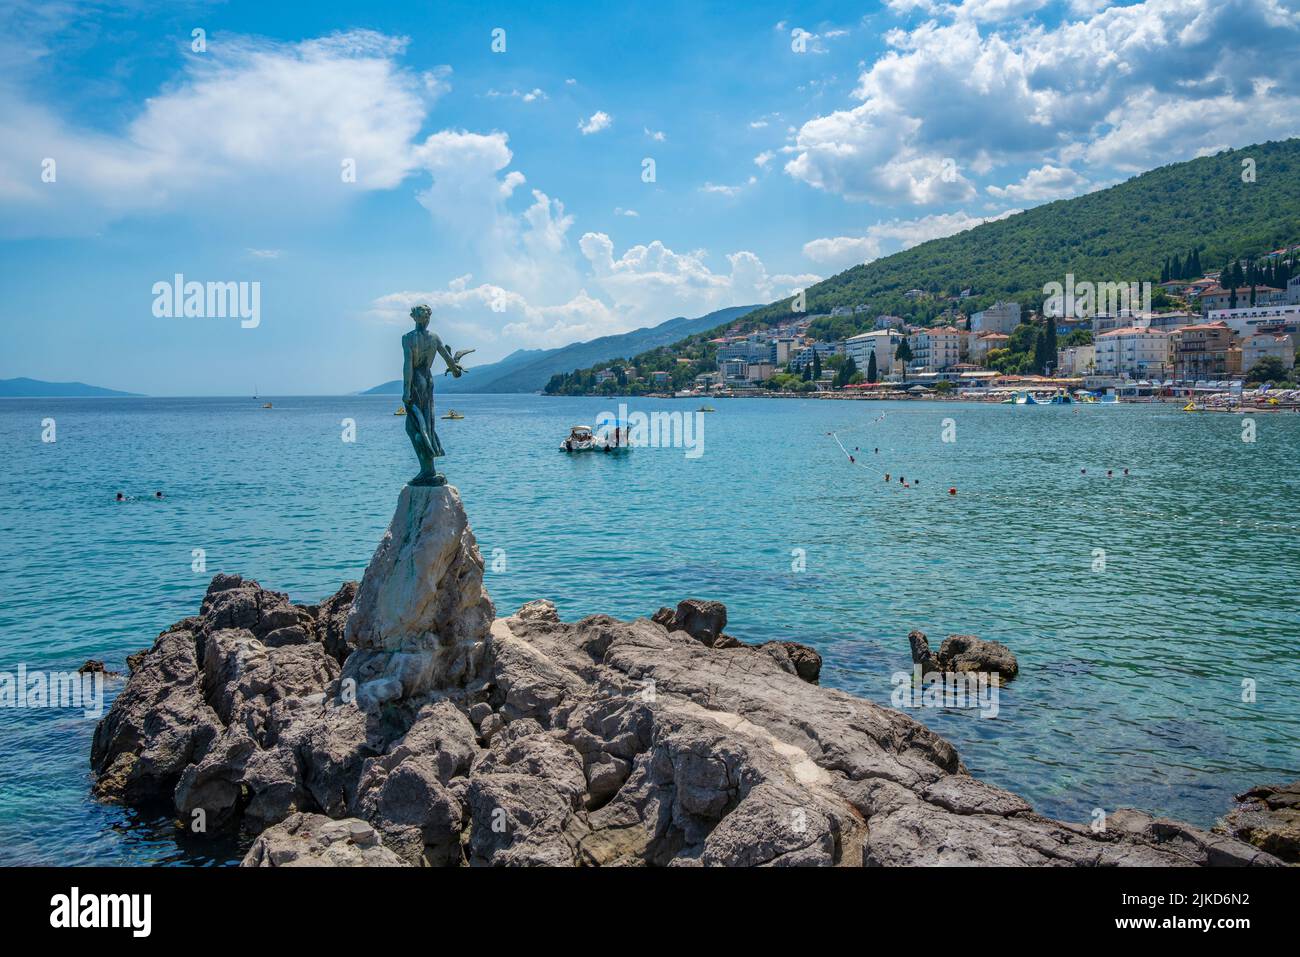 View of Maiden with the Seagull statue, The Lungomare promenade and town of Opatija in background, Opatija, Kvarner Bay, Croatia, Europe Stock Photo